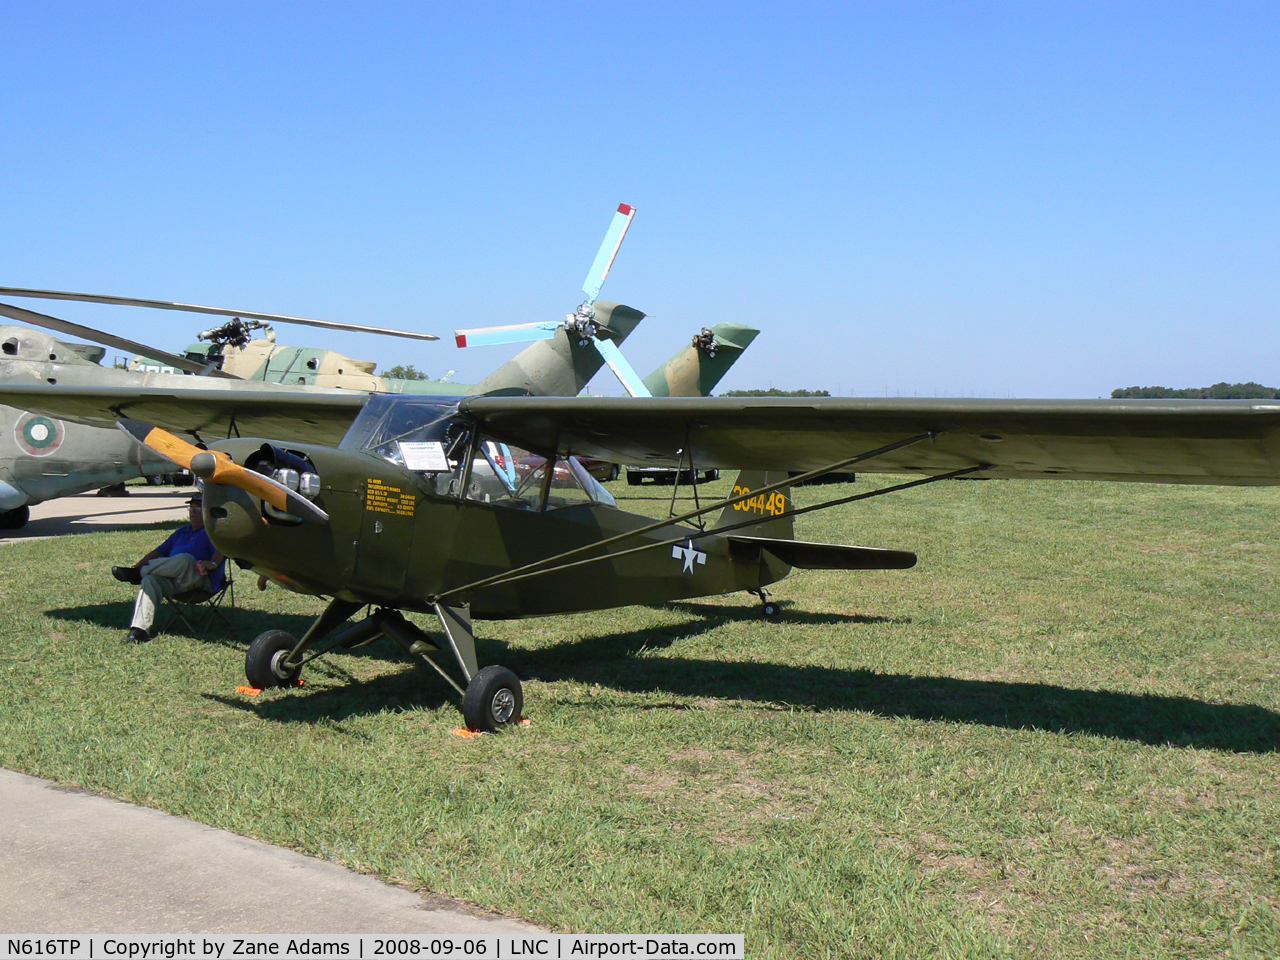 N616TP, Taylorcraft L-2B C/N 0-4449, At the DFW CAF open house 2008 - Warbirds on Parade!